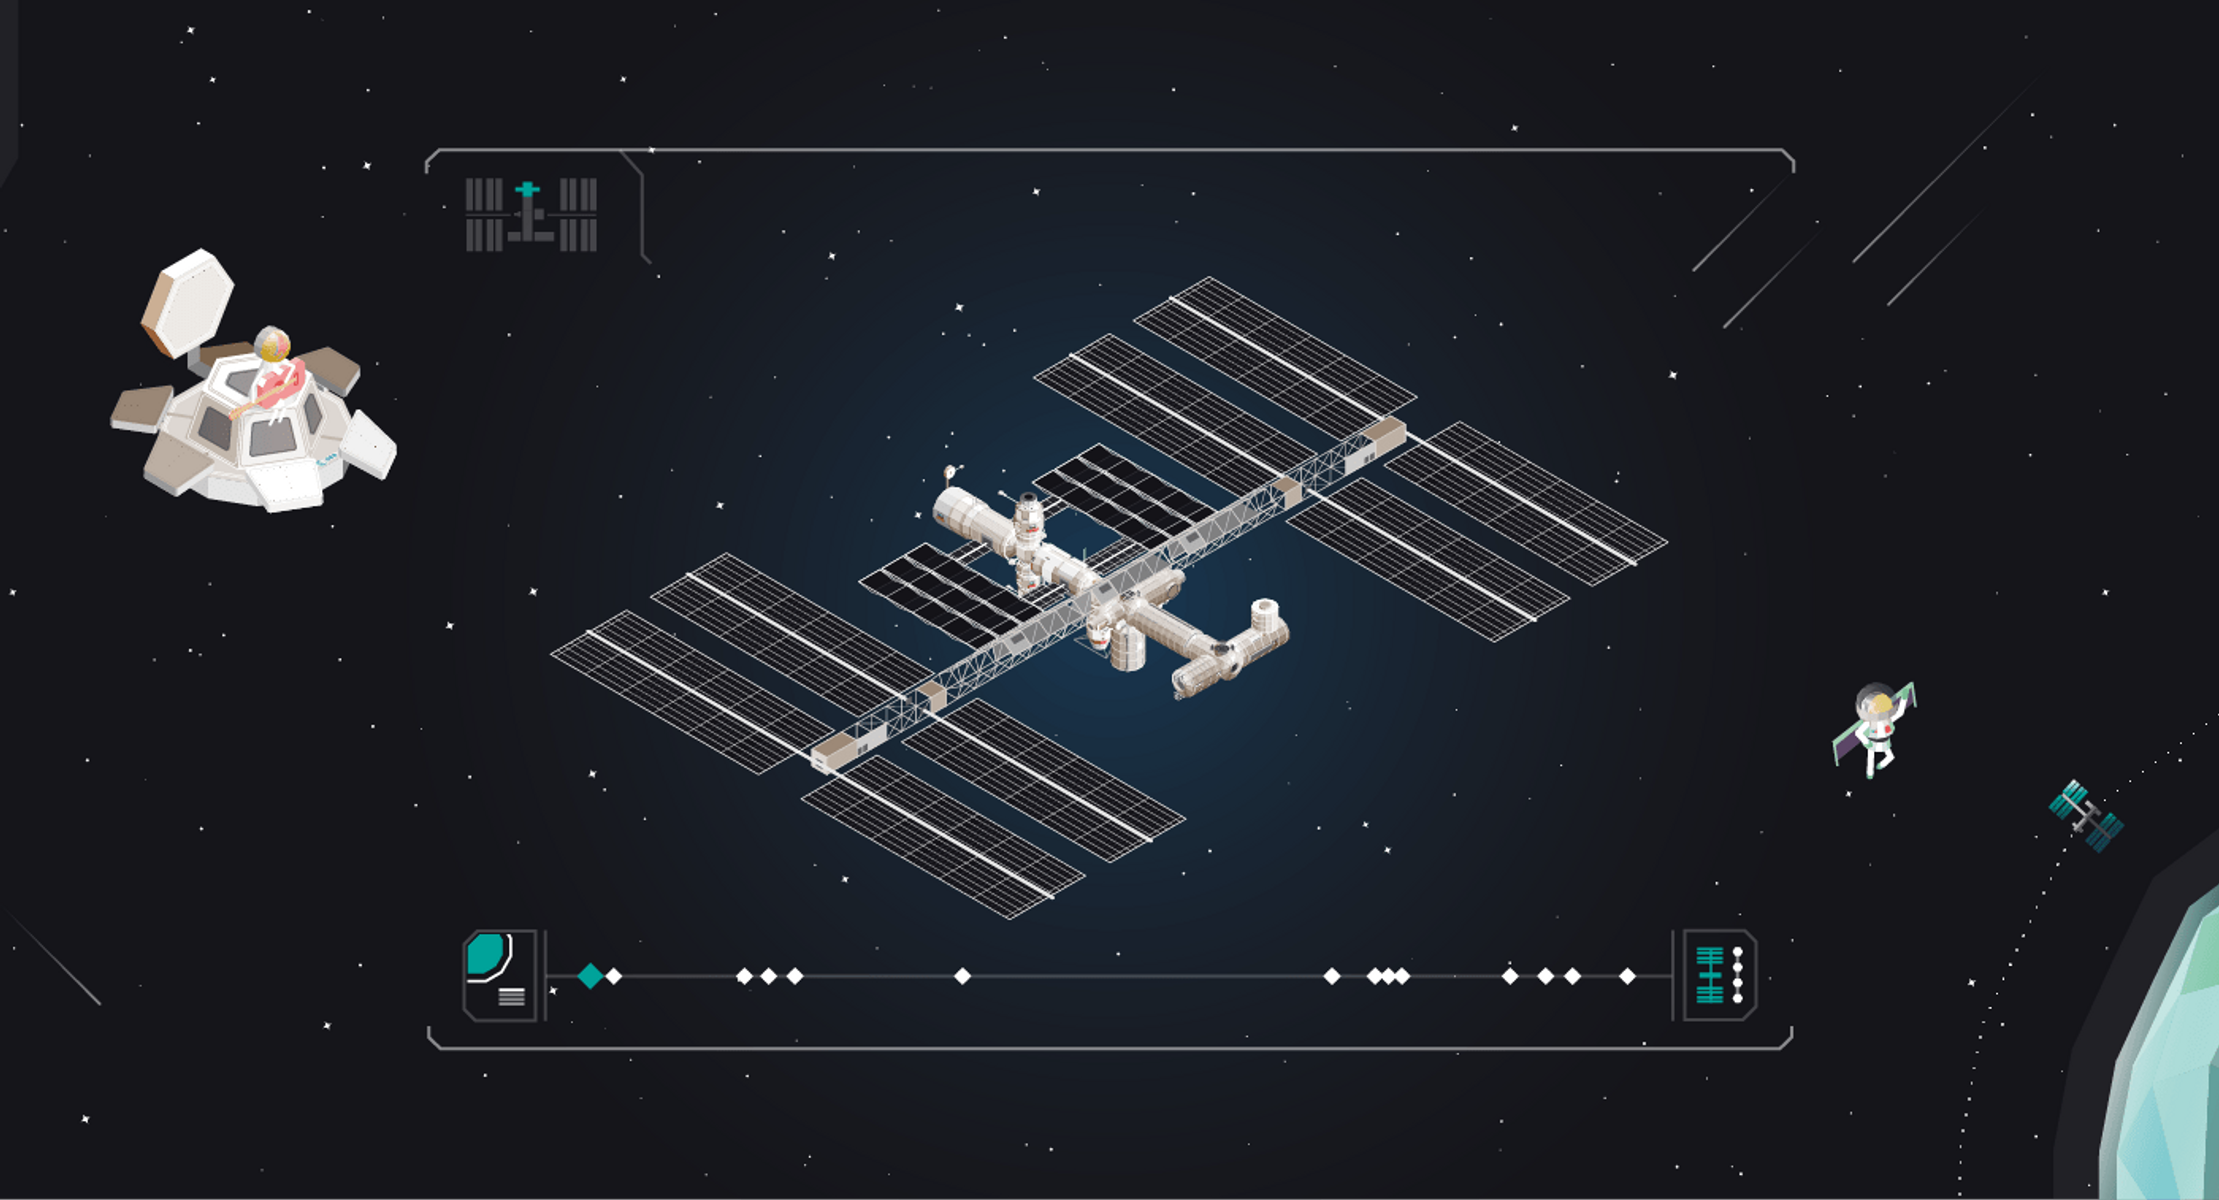 A low-poly illustration of the International Space Station floating in space. Surrounding the station are sci-fi heads up display elements. There are also other elements floating in space including a planet, an orbiting satelite and an astronaut with wings like Buzz Lightyear.